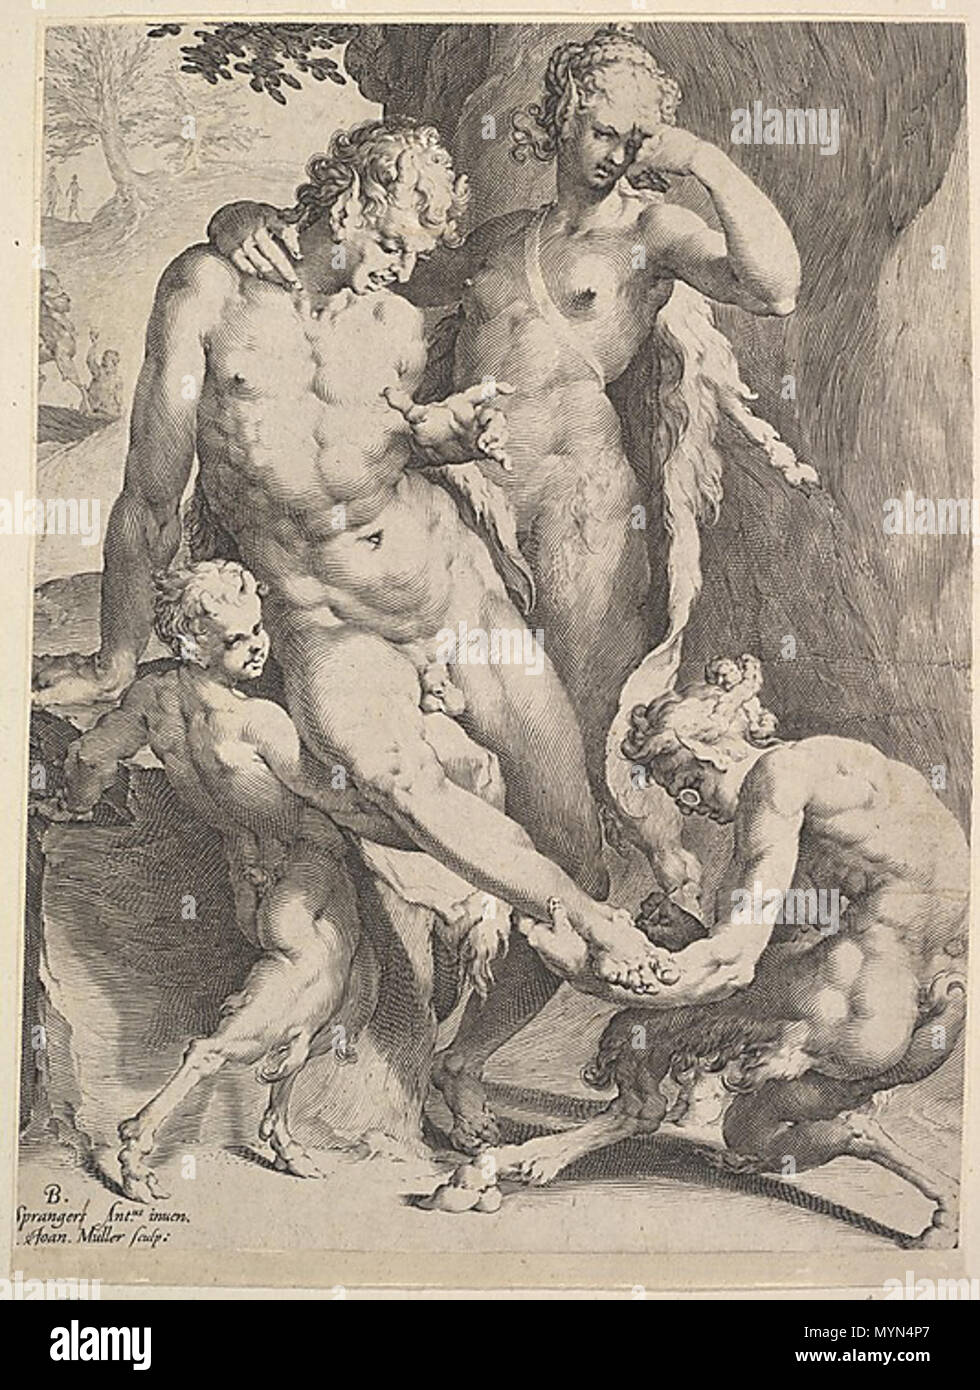 . English: Oreads Removing a Thorn from a Satyr's Foot Bartholomeus Spranger (Netherlandish, Antwerp 1546–1611 Prague) Date: ca. 1602 . 1 October 2012, 15:06:23. Bartholomeus Spranger (Netherlandish, Antwerp 1546–1611 Prague) 399 Oreads Removing a Thorn by Bartholomeus Spranger Stock Photo